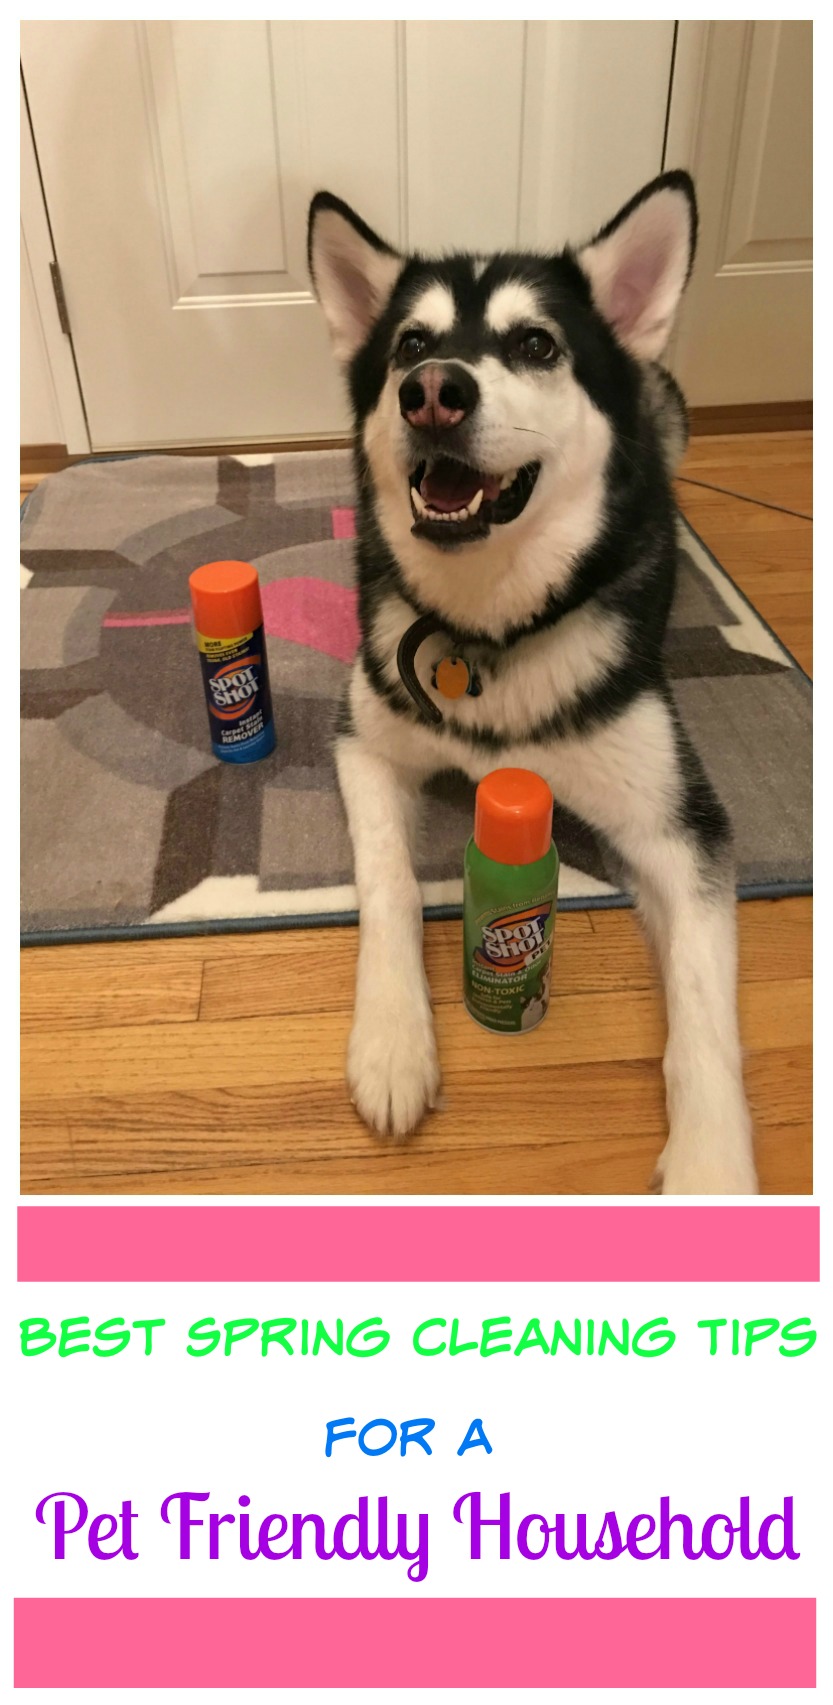 Getting your home ready for spring cleaning & not sure how to clean pet items? Check out these easy tips on how you easily clean in a pet friendly household! 